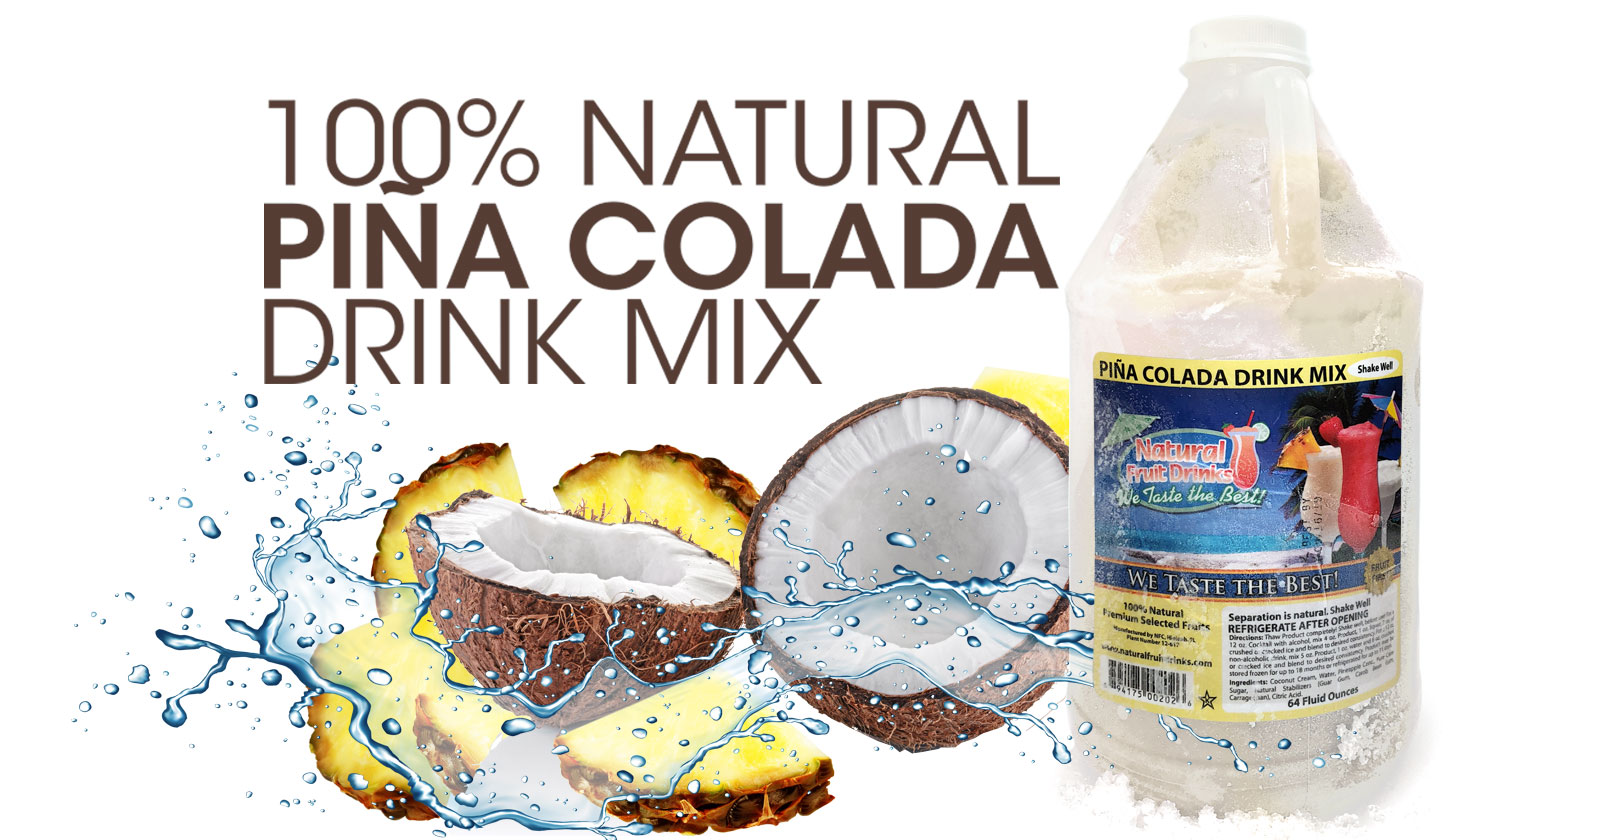 Discover our 100% Natural Pina Colada Drink Mix Puree